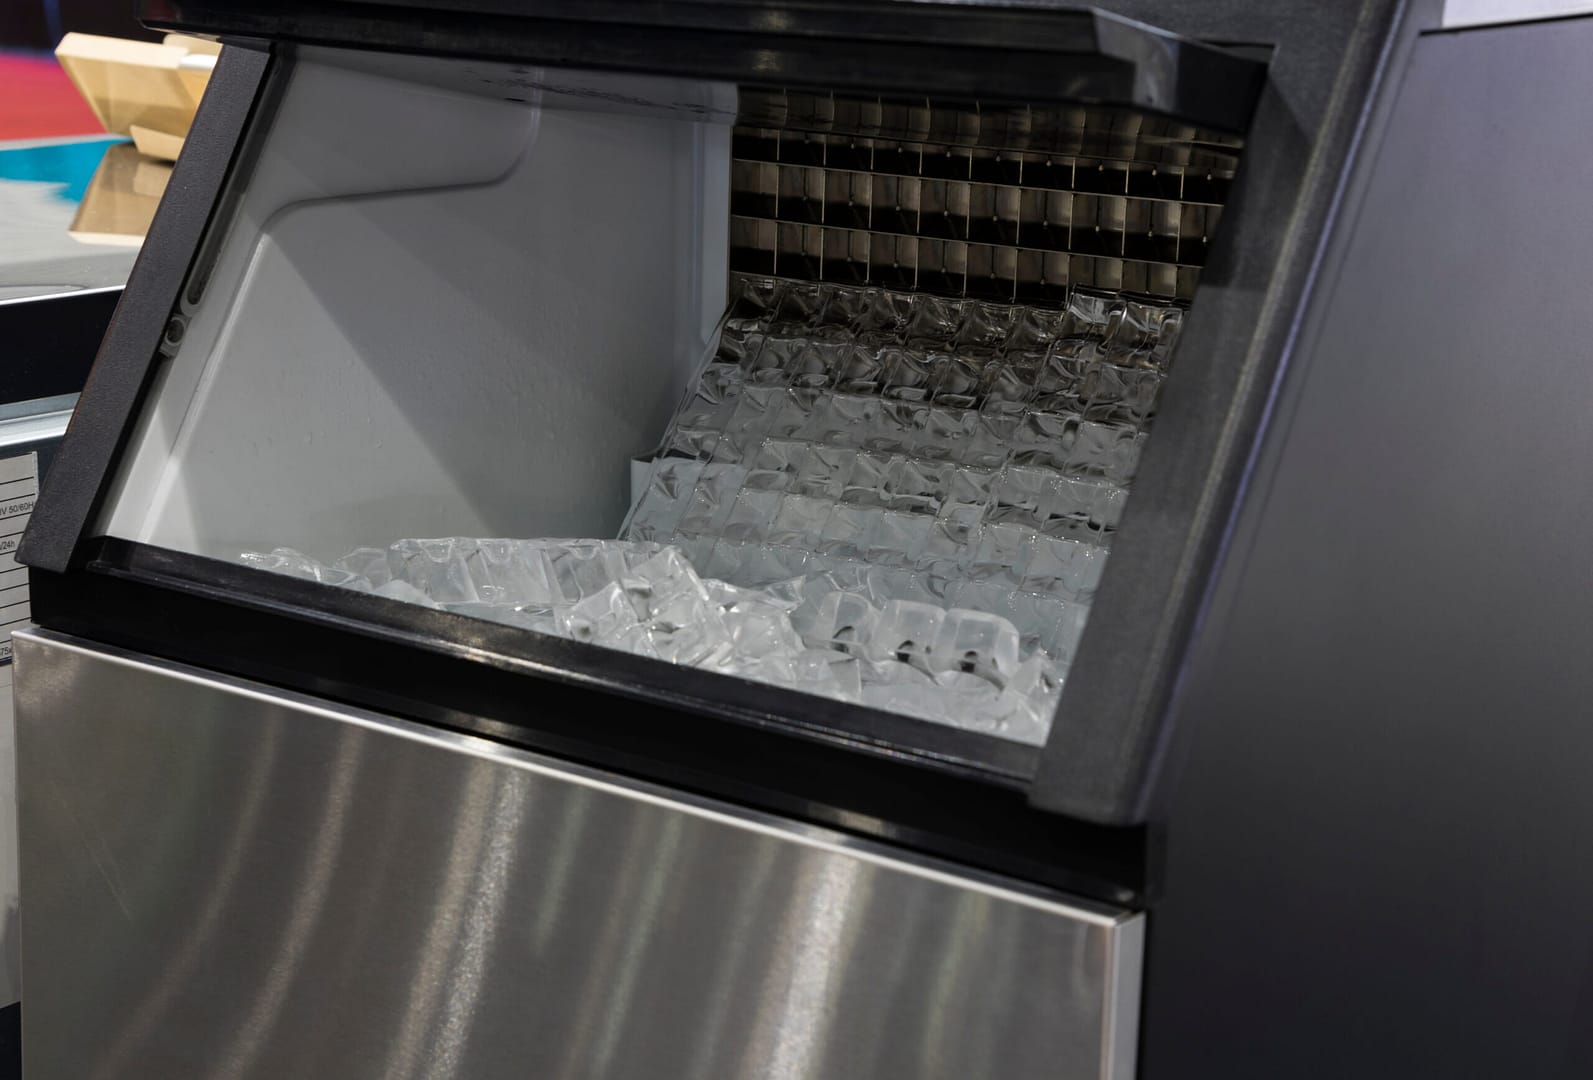 Commercial ice maker unit, showcasing the need for specialized appliance repair marketing.